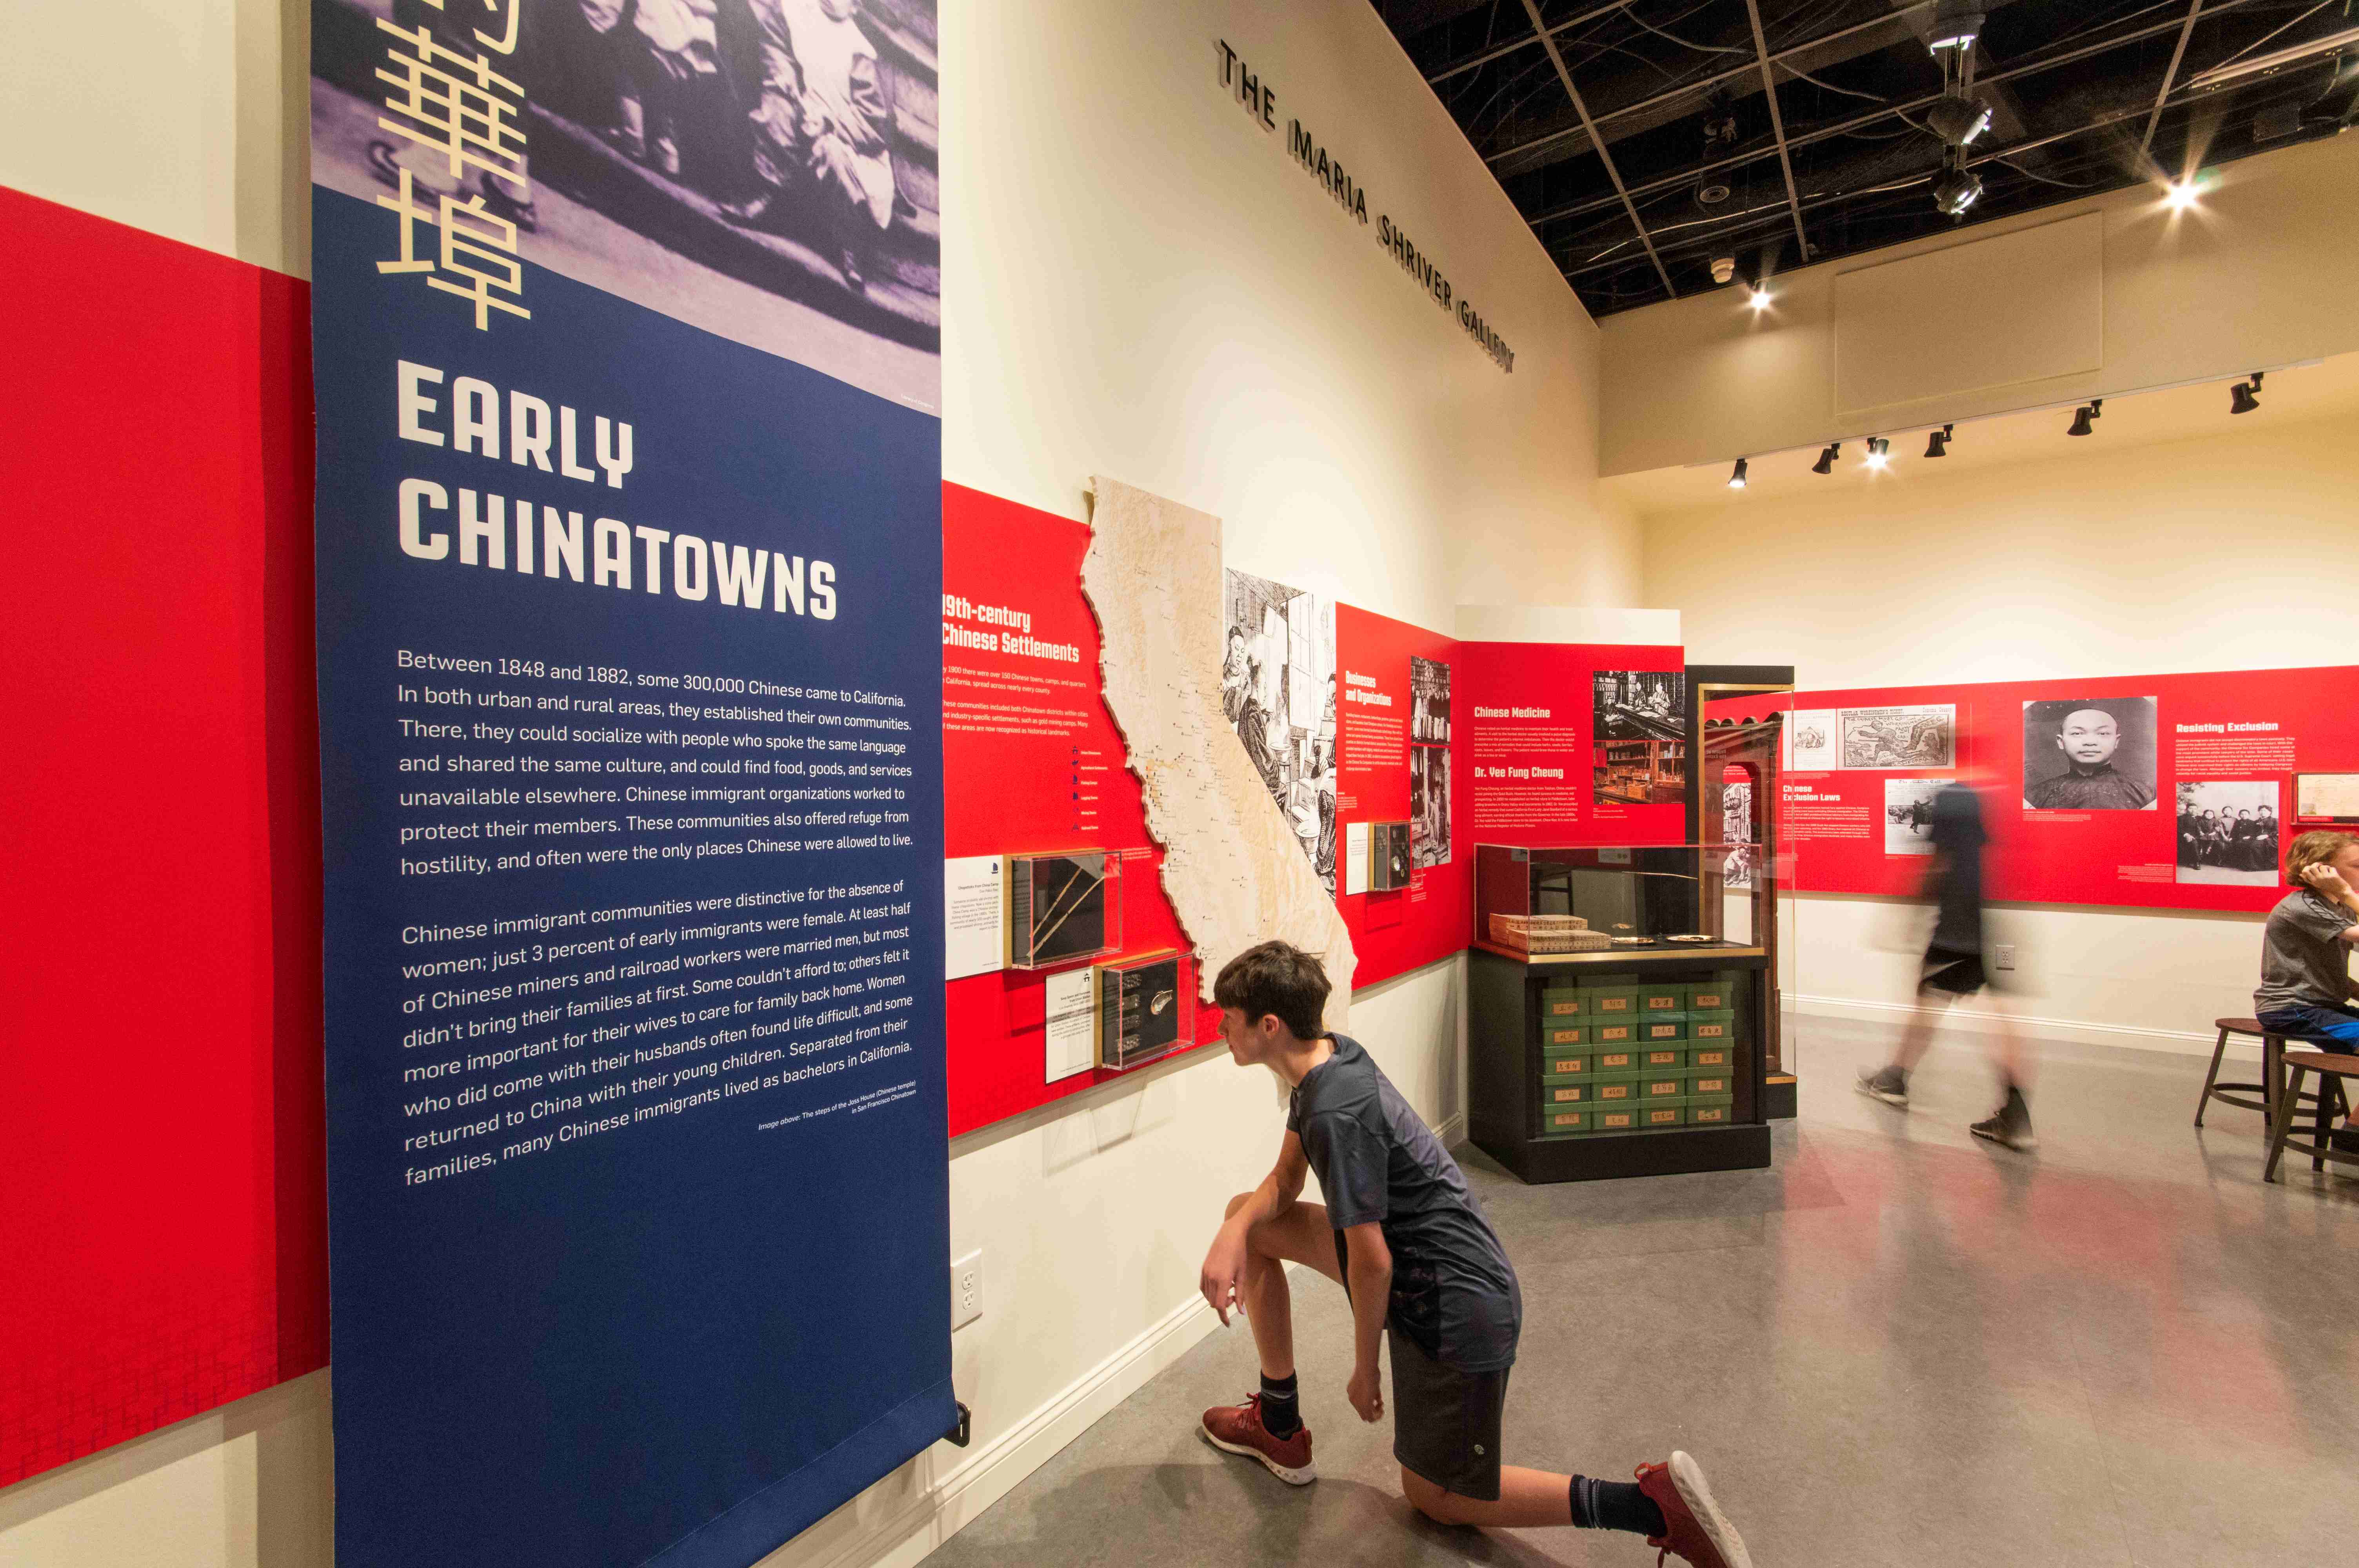 a boy kneeling down looking at an infographic in a museum